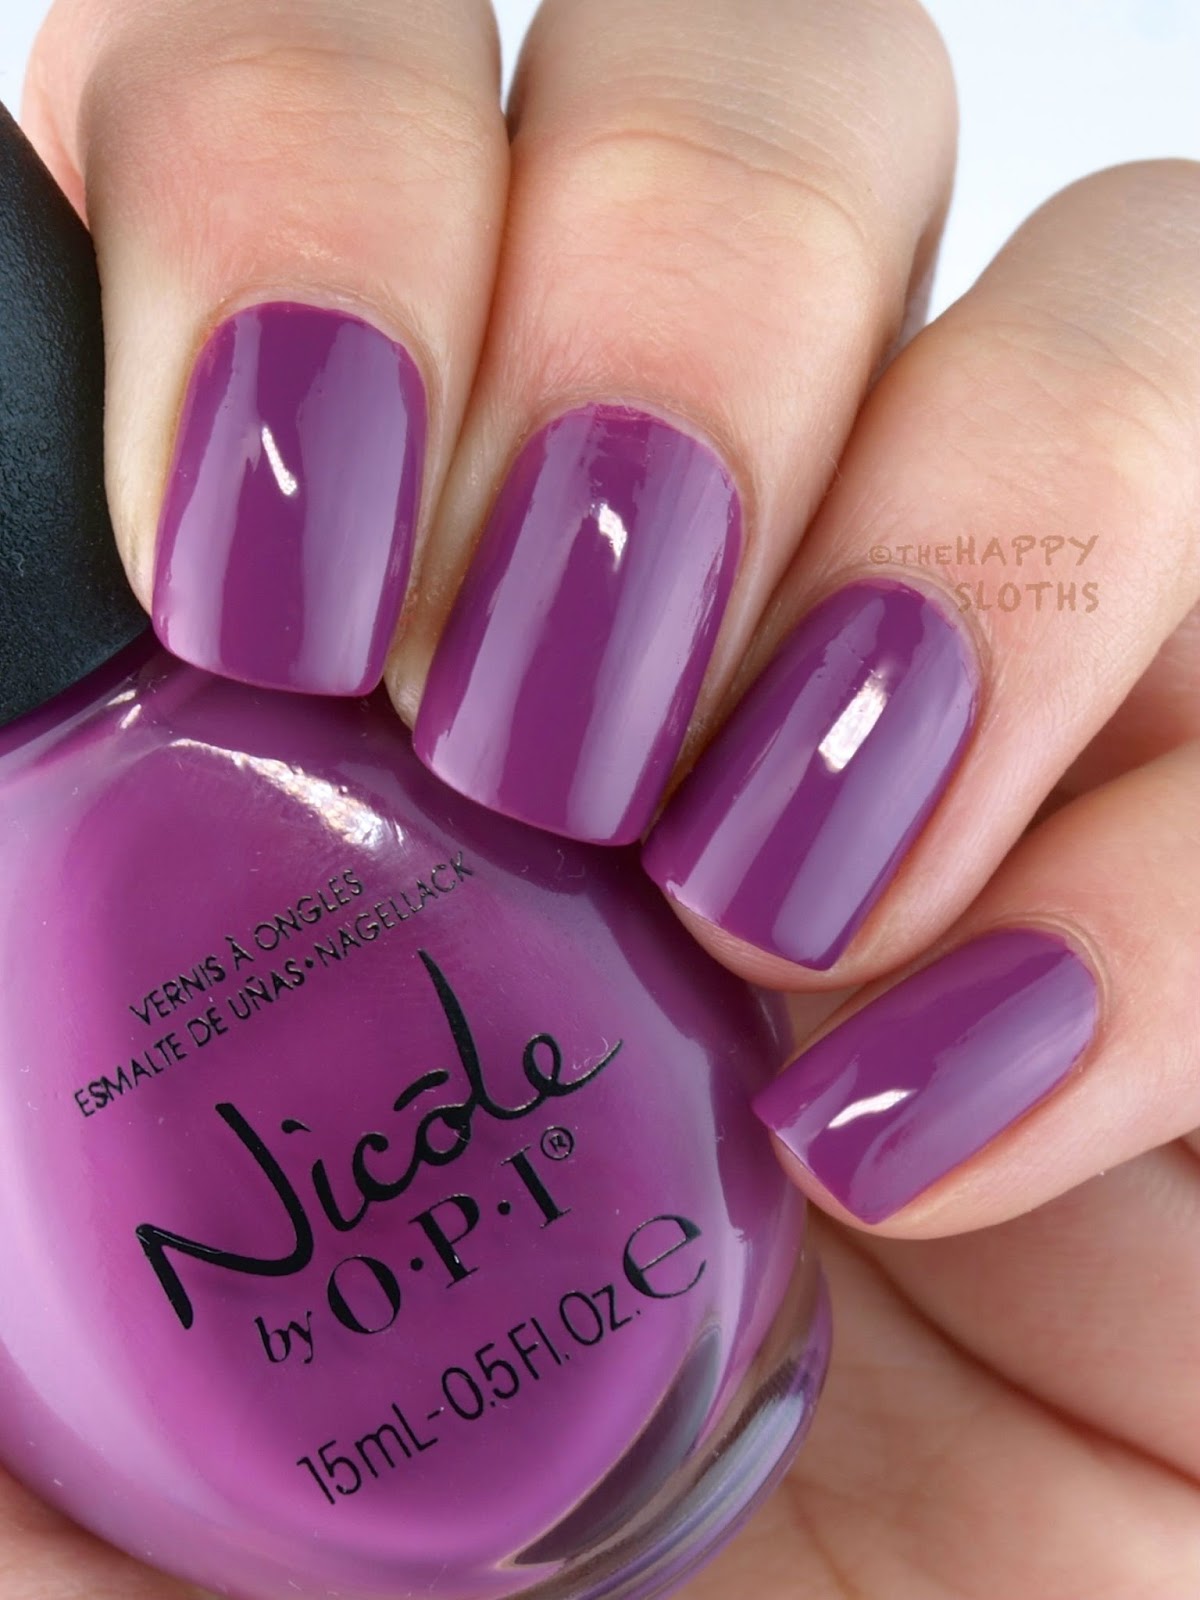 Nicole OPI In Grape Demand Swatches